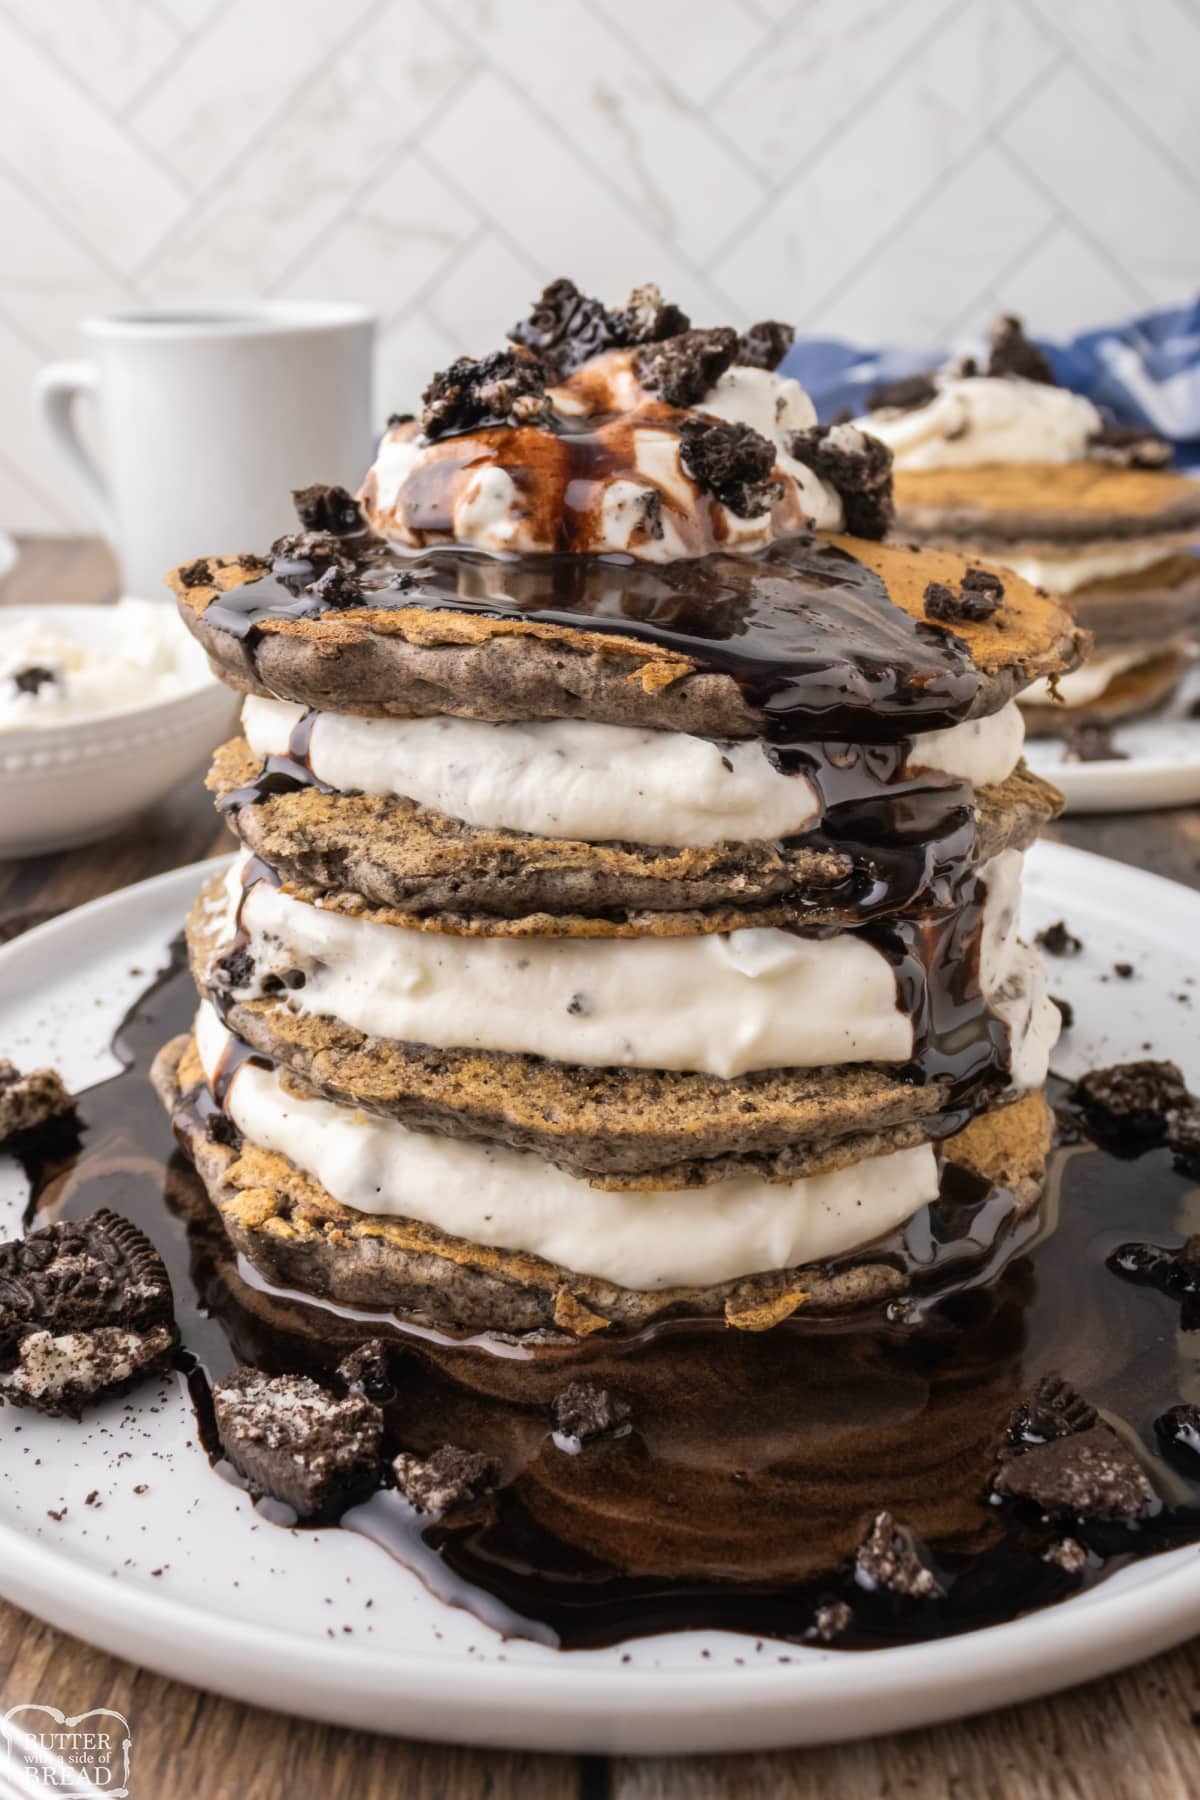 Oreo Pancakes are a delicious twist on the classic breakfast favorite. These light and fluffy pancakes are made with crushed Oreos in the batter, then topped with whipped cream and more crushed Oreos!